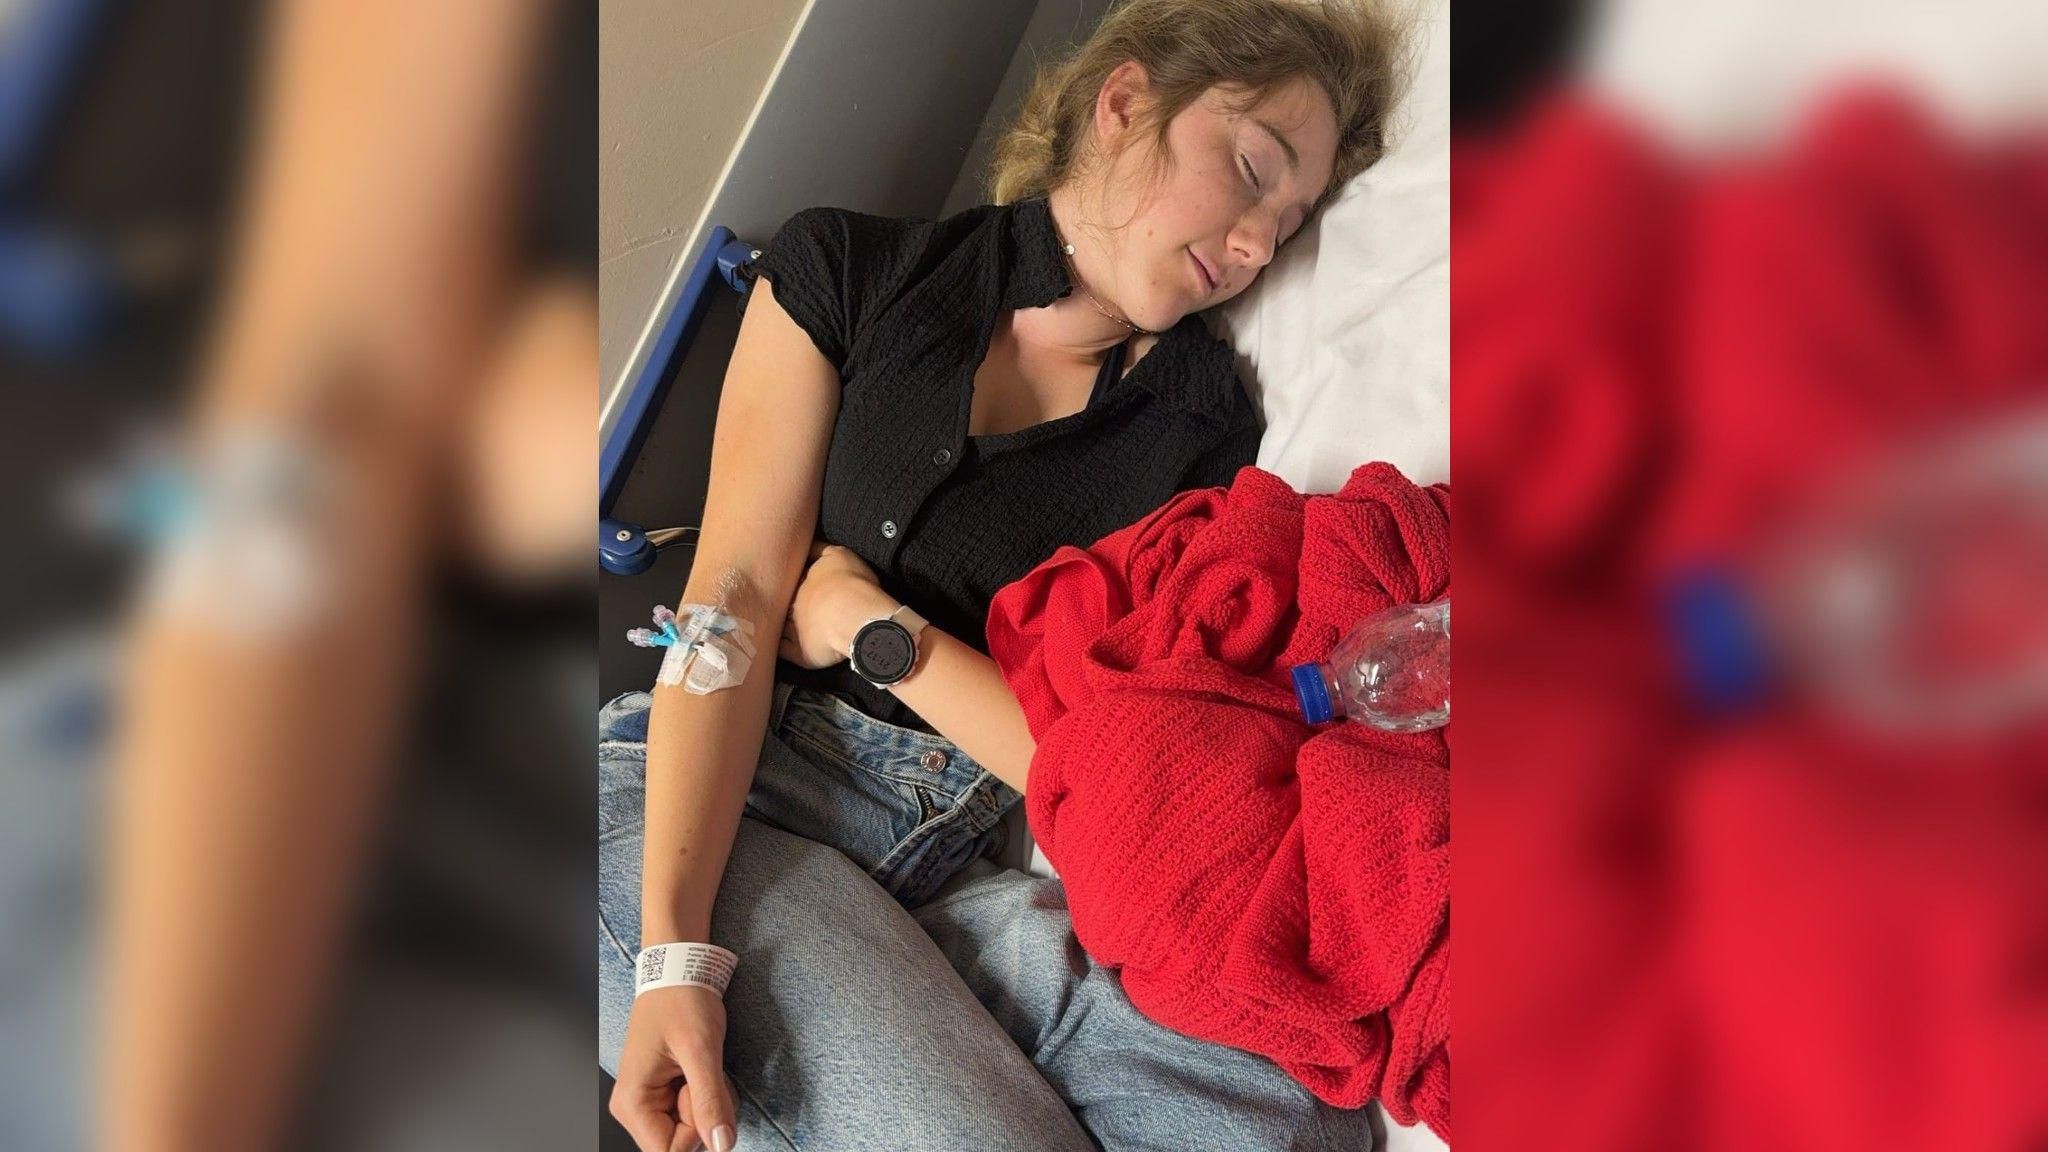 Rebecca Norman in hospital with a cannula in her arm